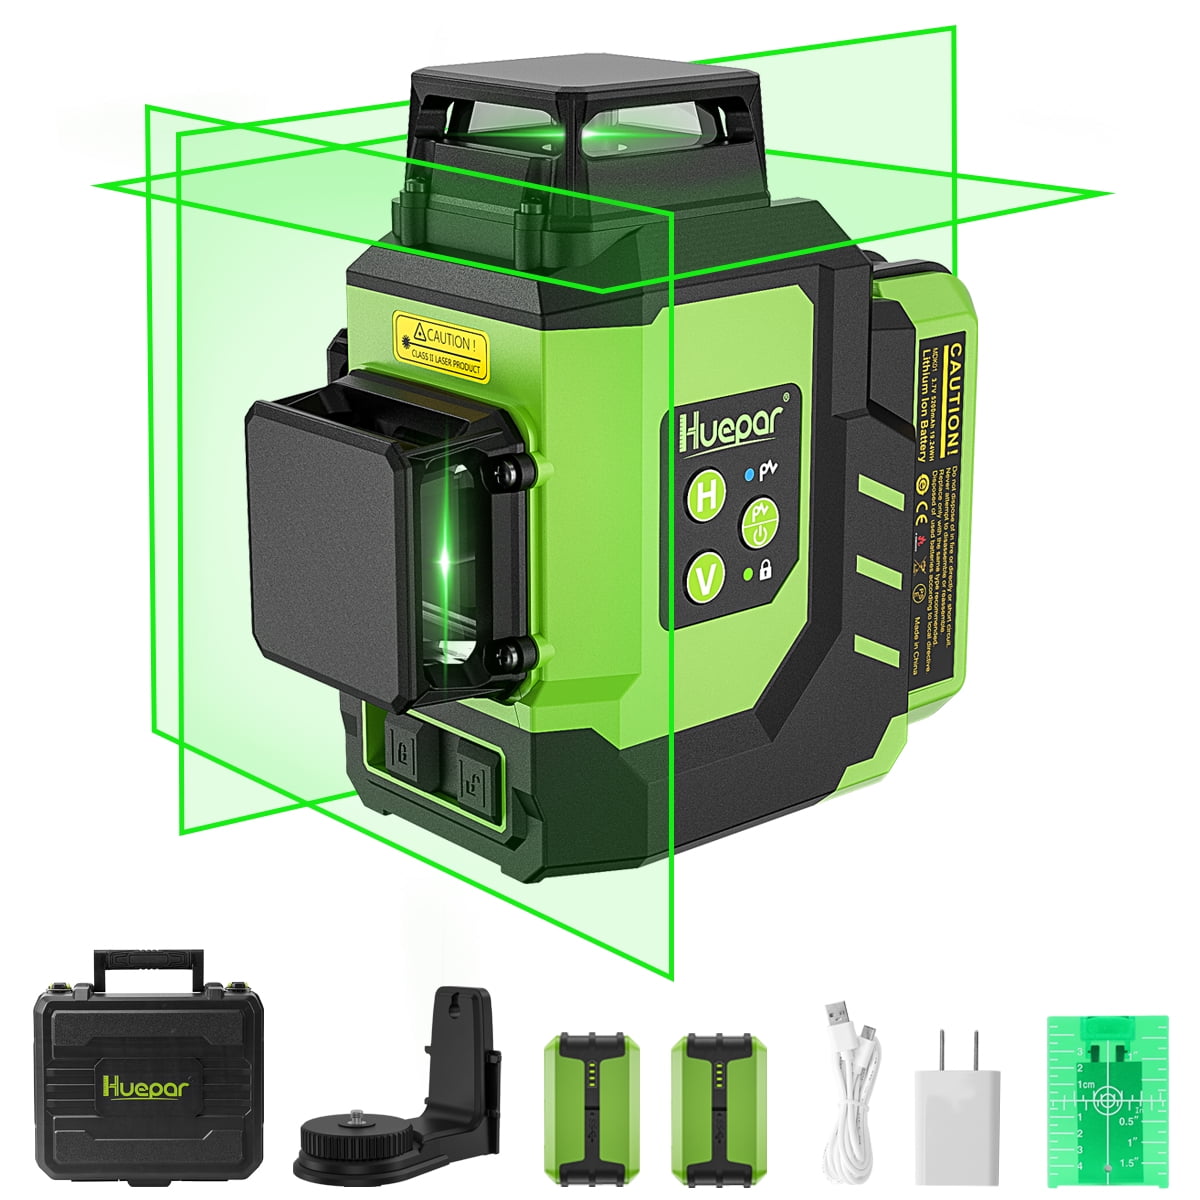 3D 12 Lines Self-Leveling Laser Level, 197ft Green Beam 3 x 360 Tiling Floor Cross Line Laser Level Tool with 2 x 5200mAh Li-Ion Batteries and